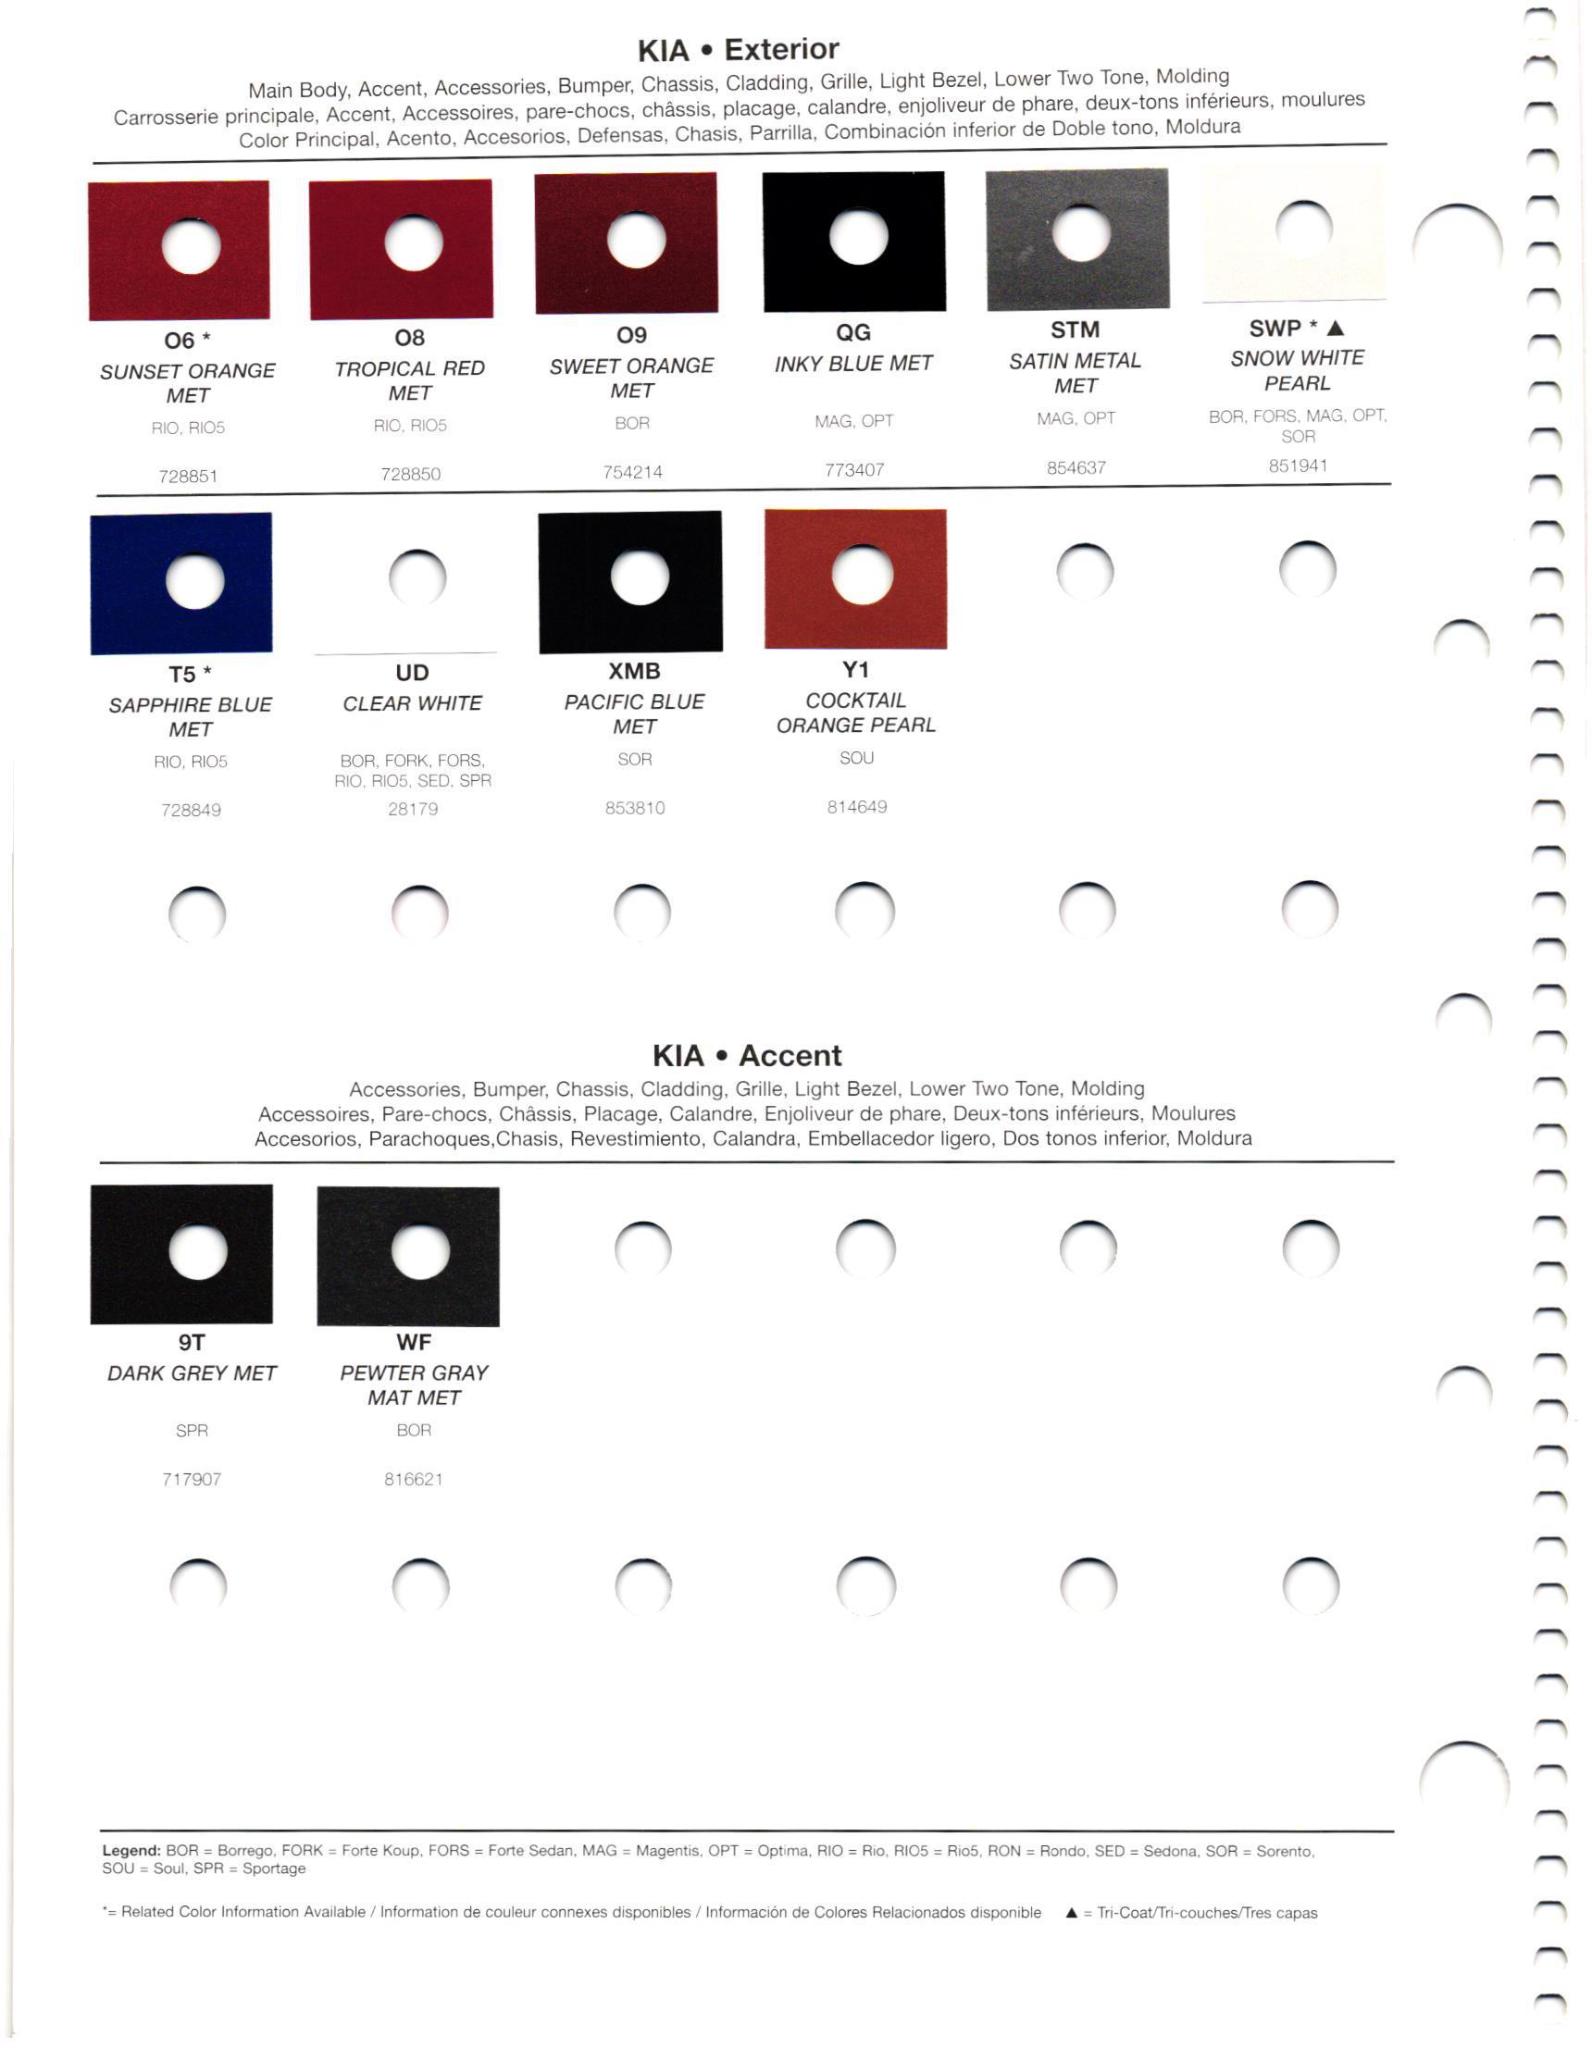 Color codes for Kia models in 2011